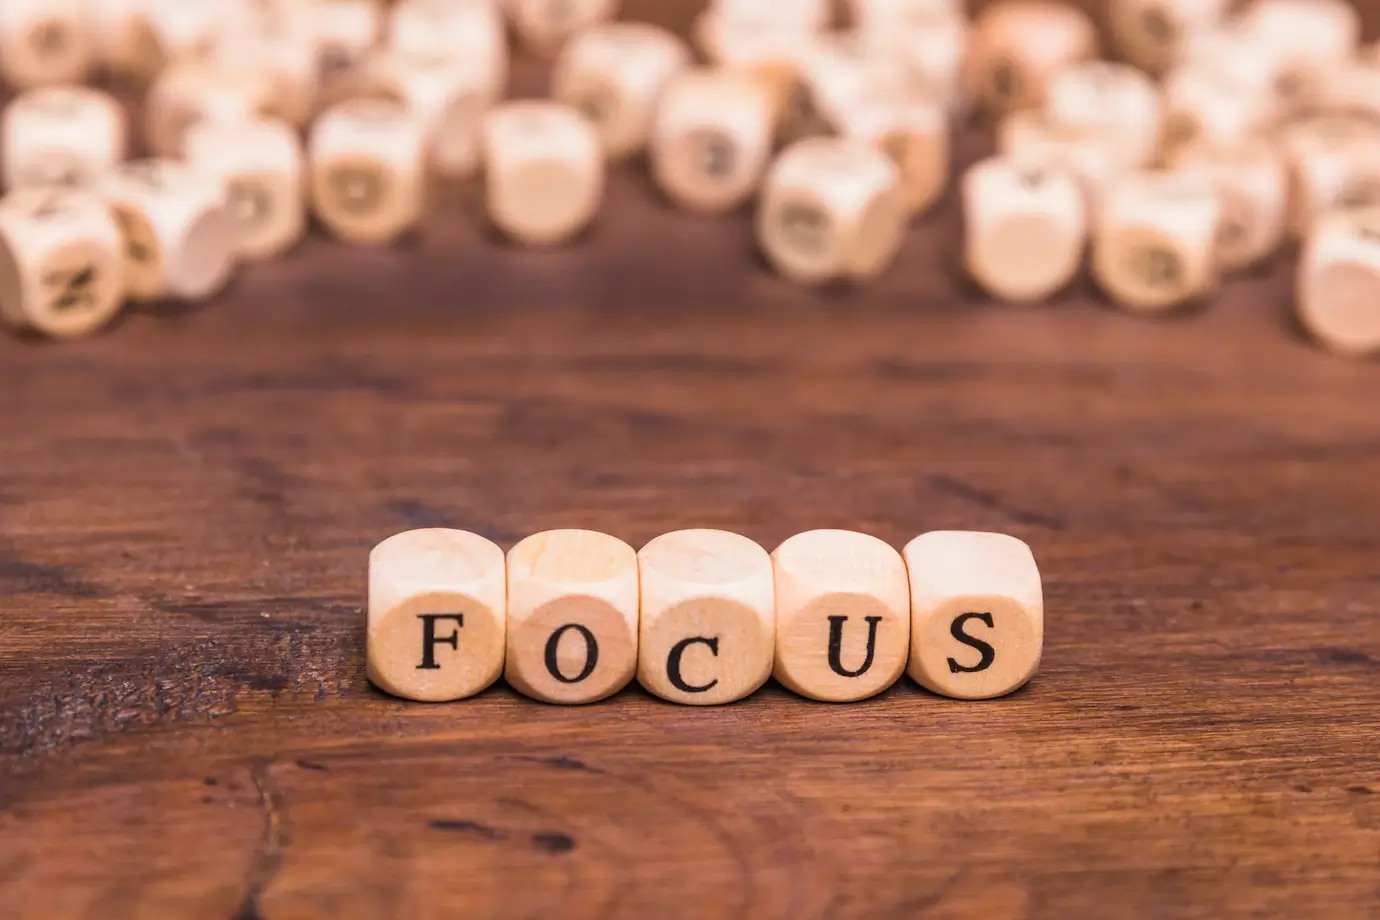 Stay Focused Quotes to Achieve Your Goals